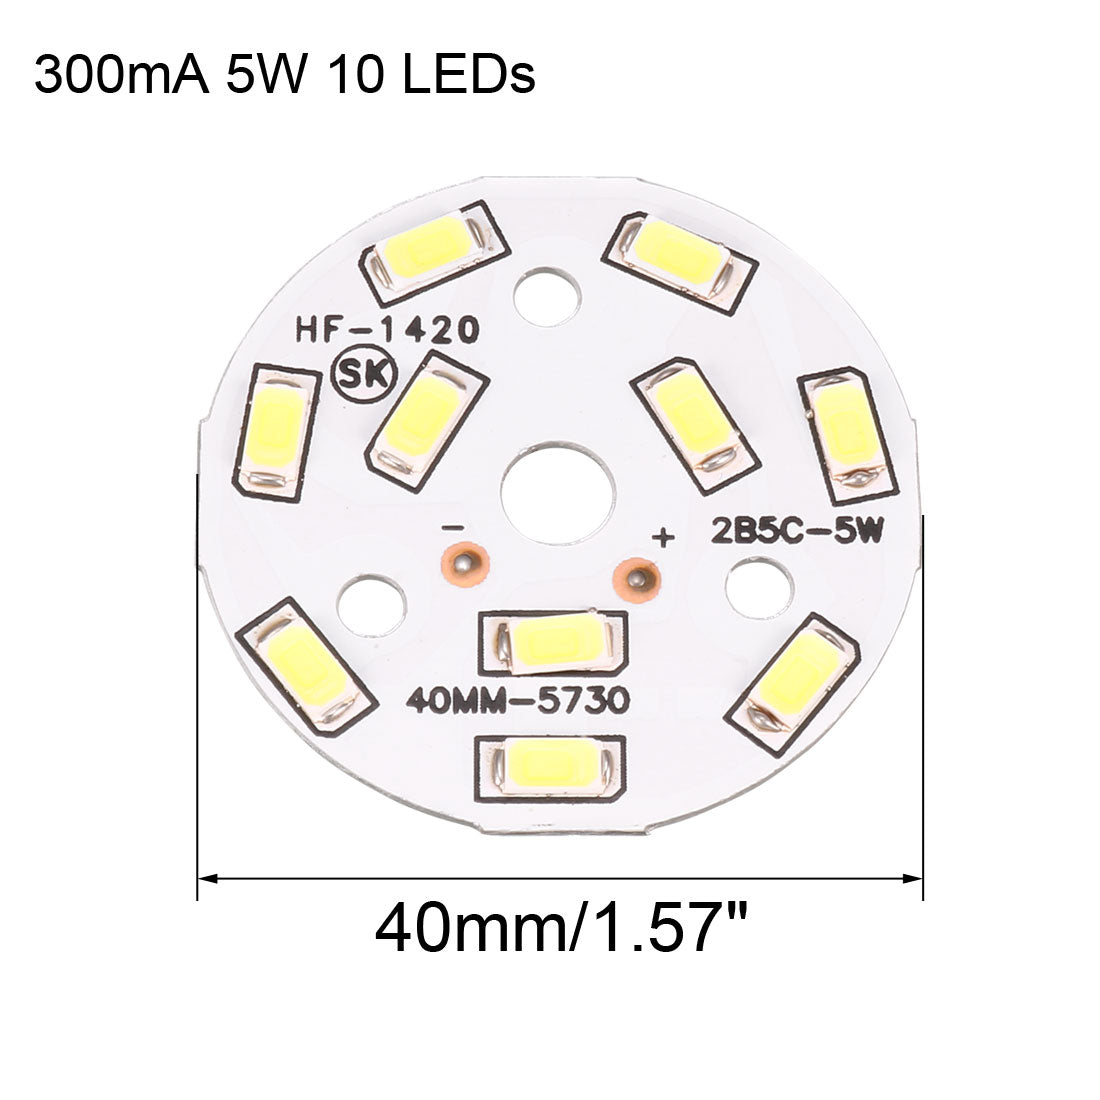 uxcell Uxcell 300mA 5W 10 LEDs 5730 Surface Mounted Devices LED Chip Module Aluminum Board Pure White Super Bright 40mm Dia 10pcs